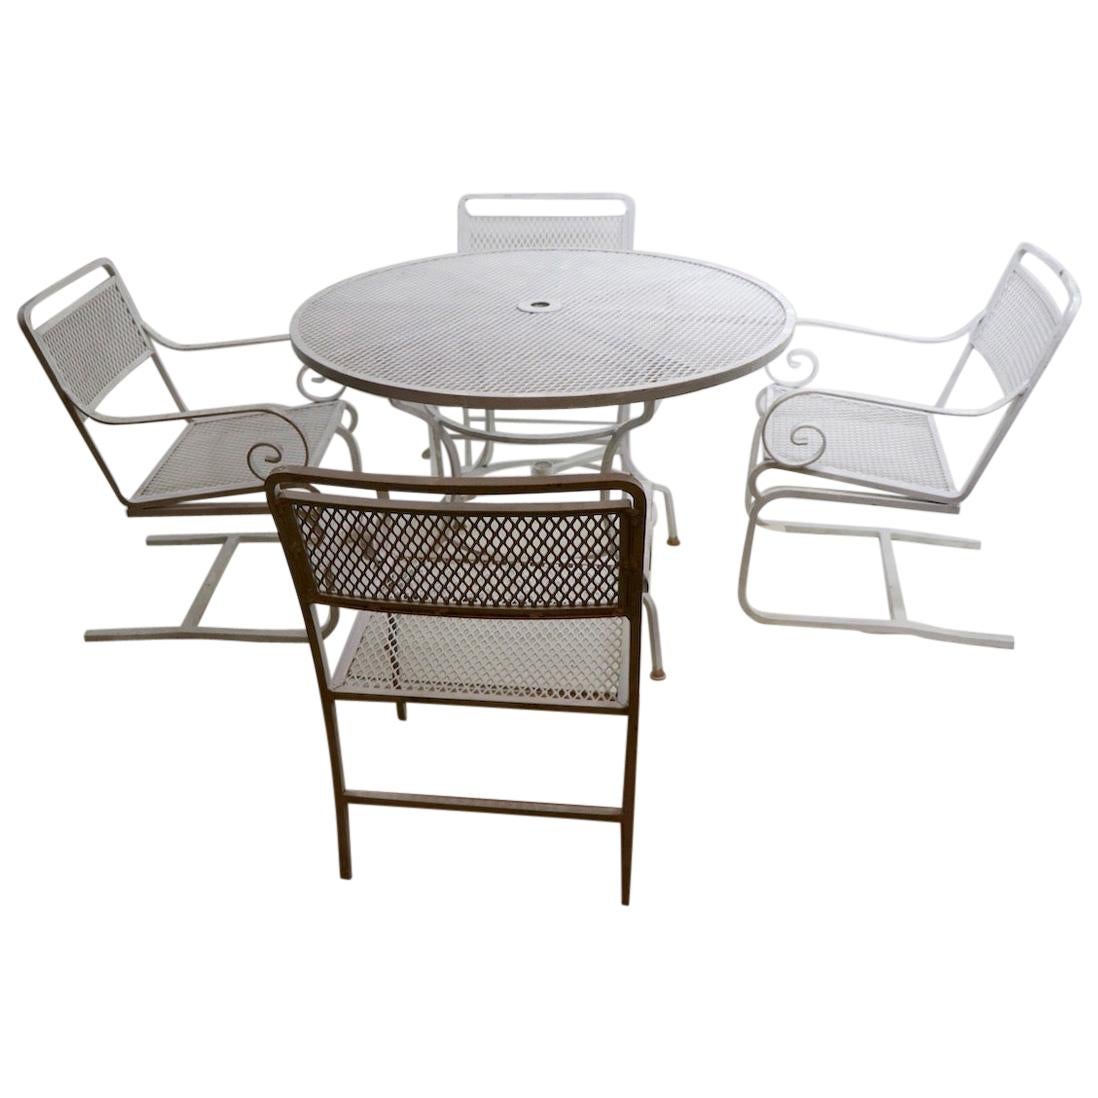 5 Pc. Neoclassic Hollywood Regency Patio Dining Set of Cast Aluminum and Steel